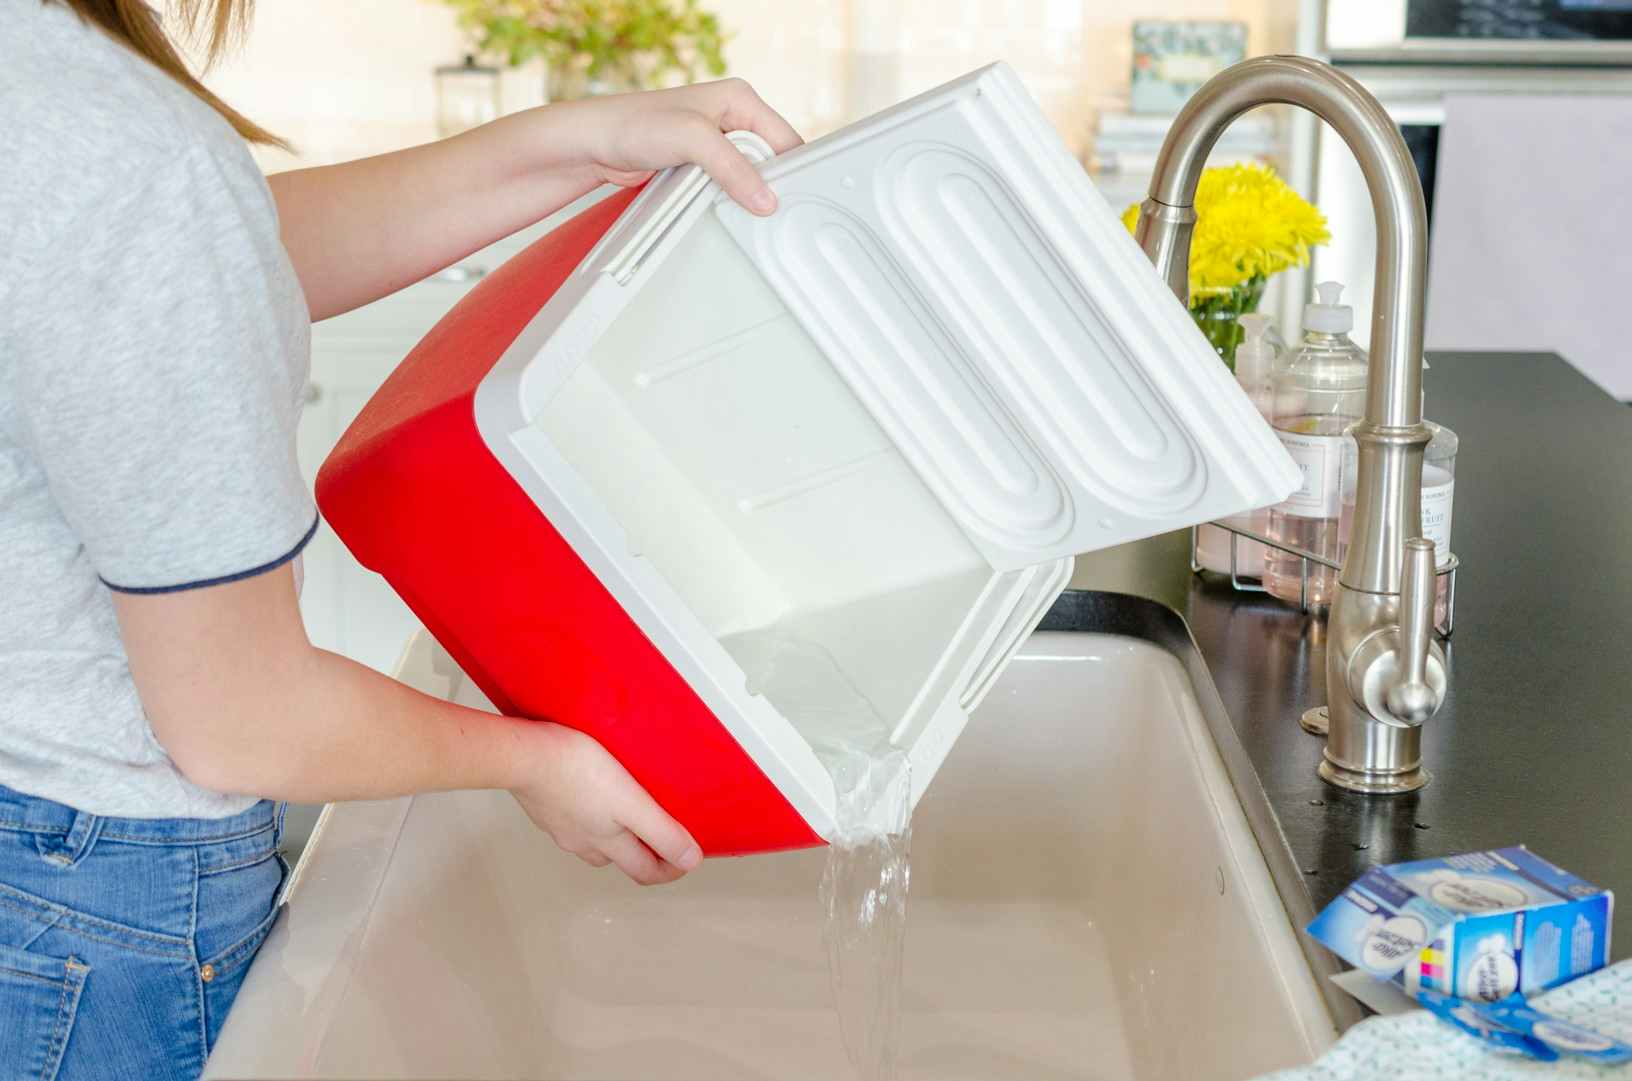 Deodorize your smelly cooler.